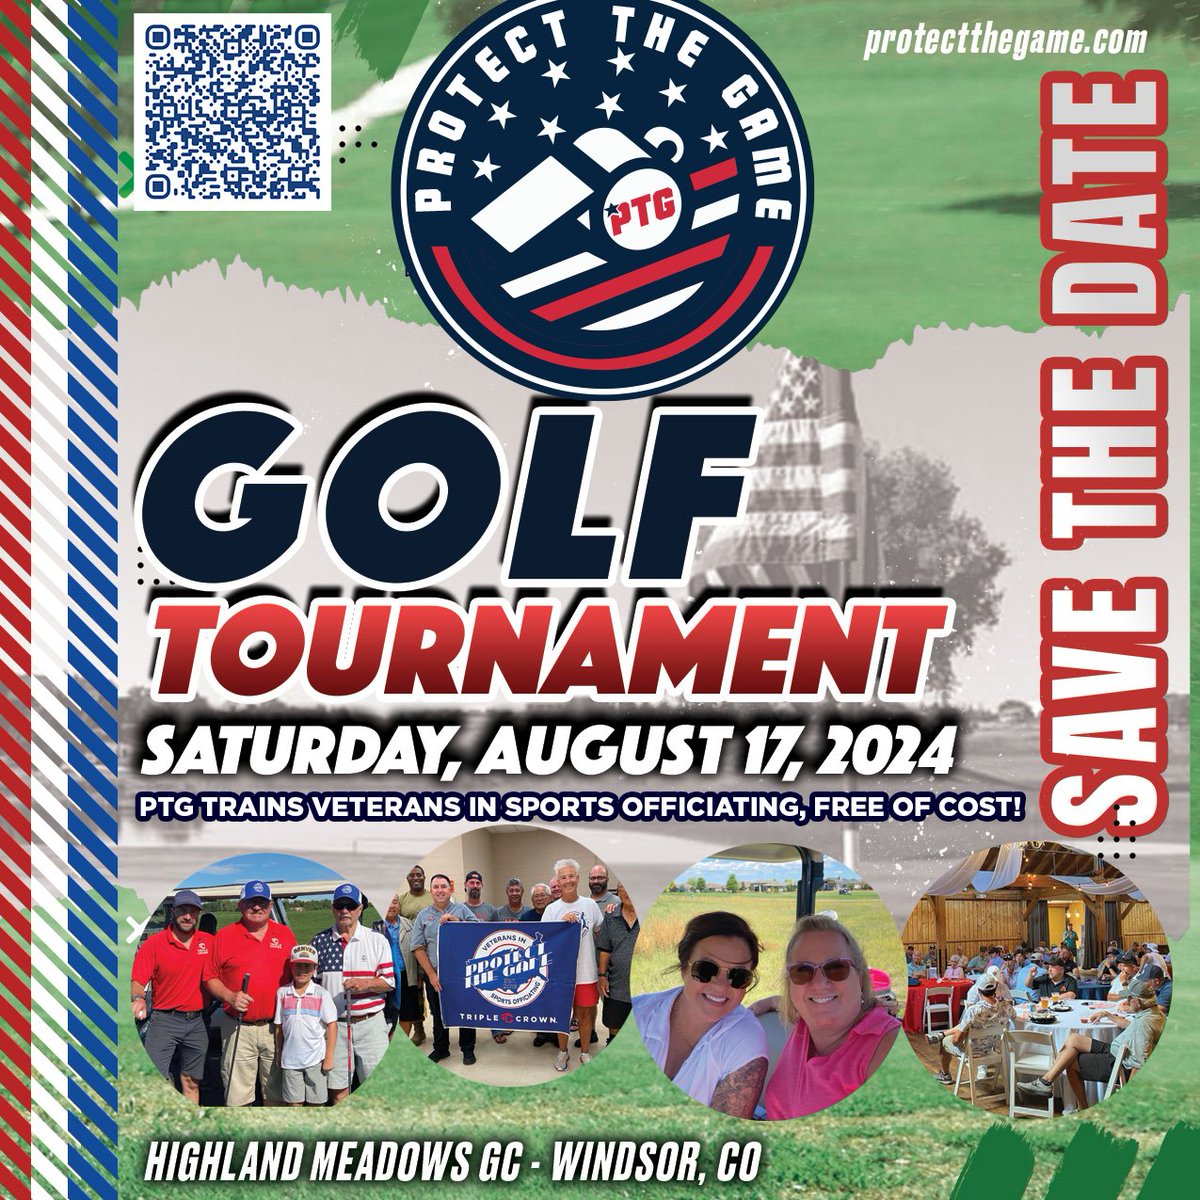 Registration is officially OPEN for the 2024 Protect The Game Golf Tournament at Highland Meadows in Windsor! Join us for our largest fundraiser and a GREAT time supporting veterans! 📅 Saturday, August 17 | 8 a.m. shotgun start Register here: bit.ly/4bvp0YJ